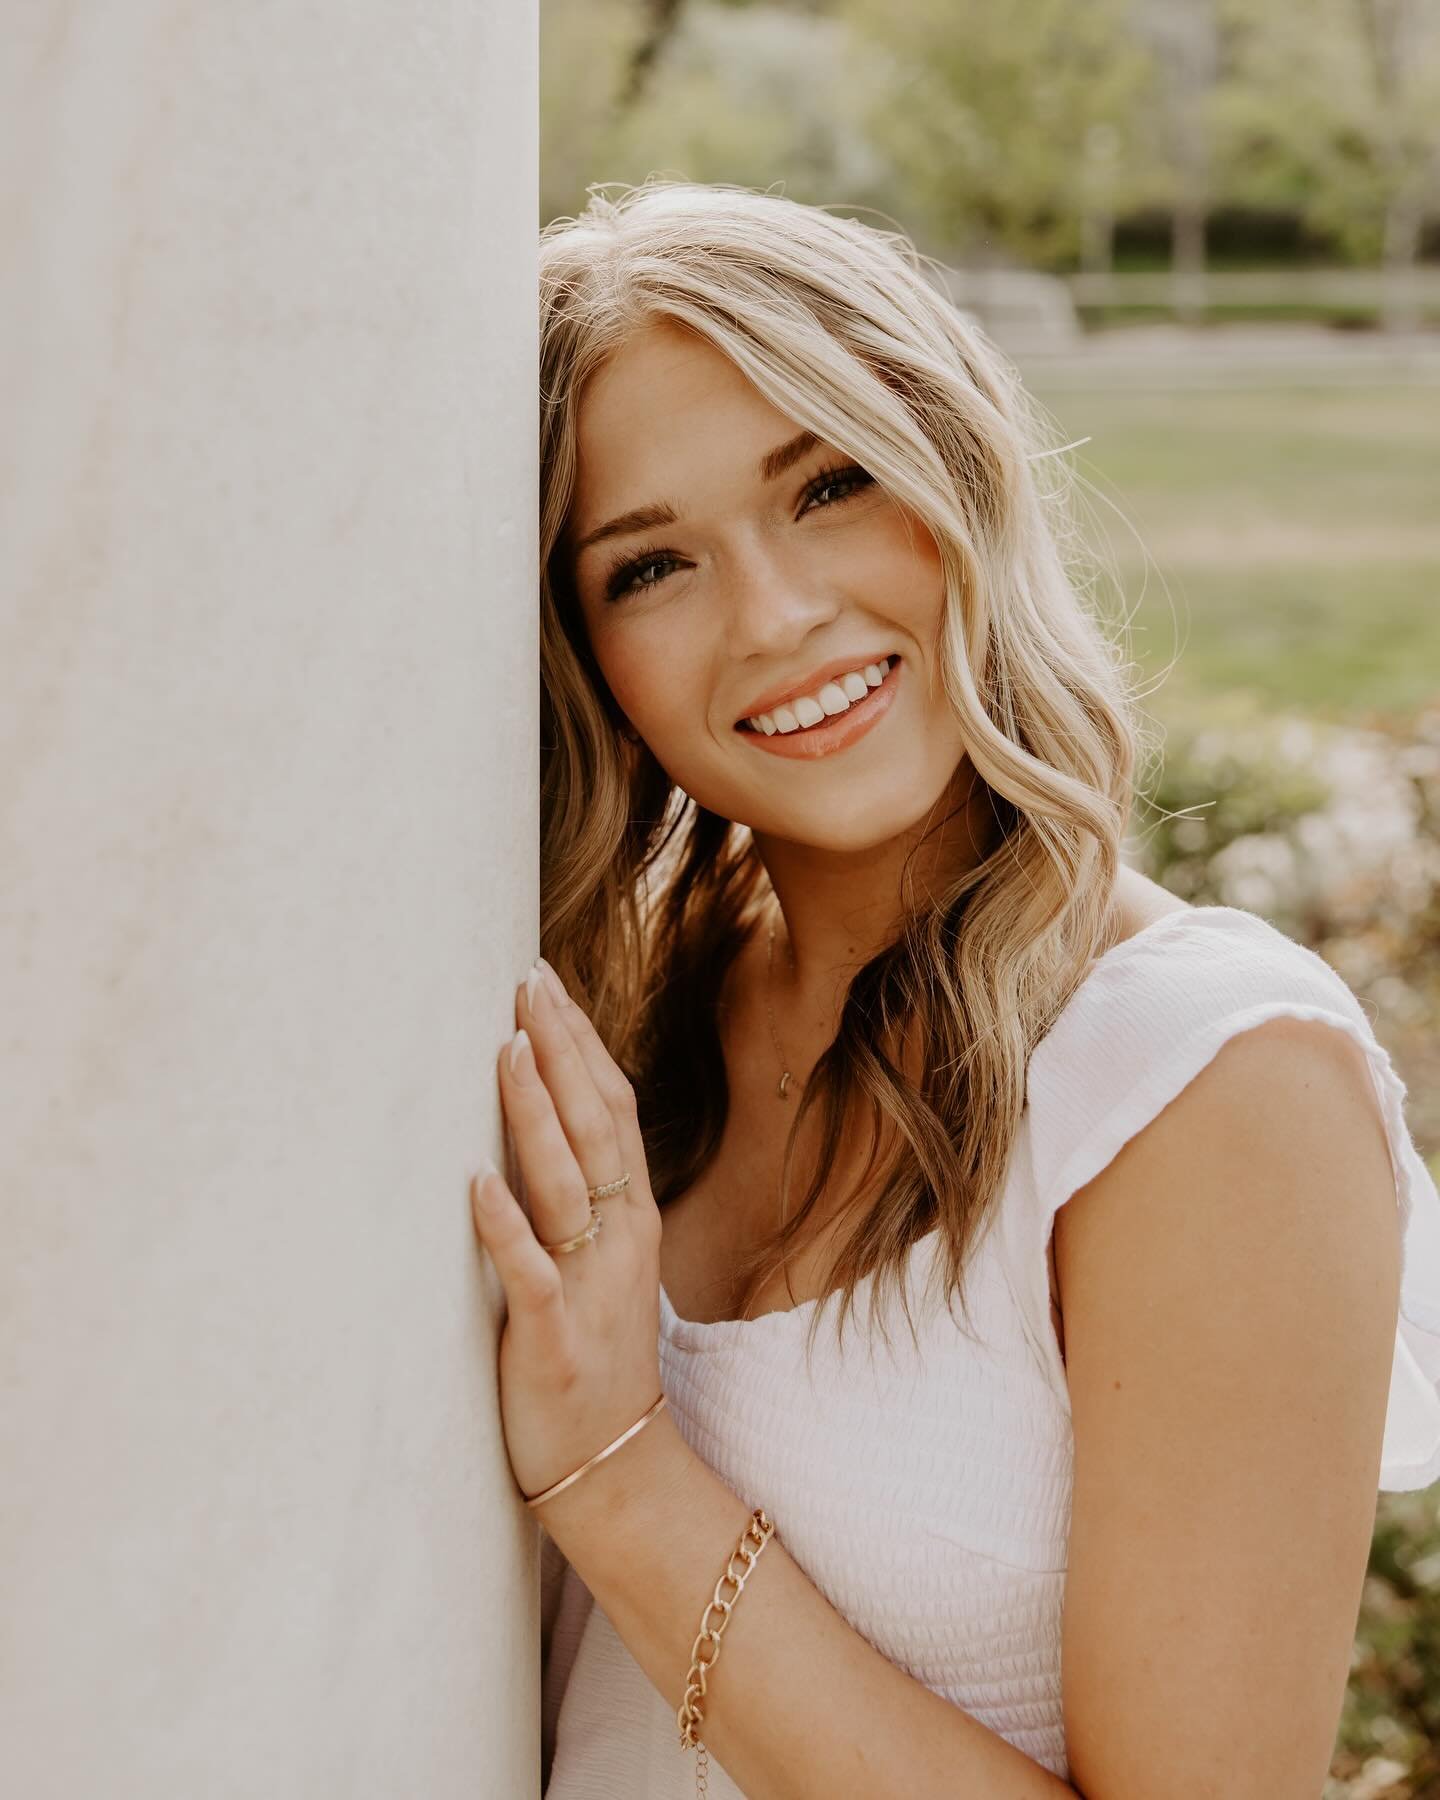 Just got this gorgeous girl&rsquo;s gallery sent off! I can&rsquo;t believe it&rsquo;s already graduation season! I&rsquo;m loving all of these senior sessions 🤩